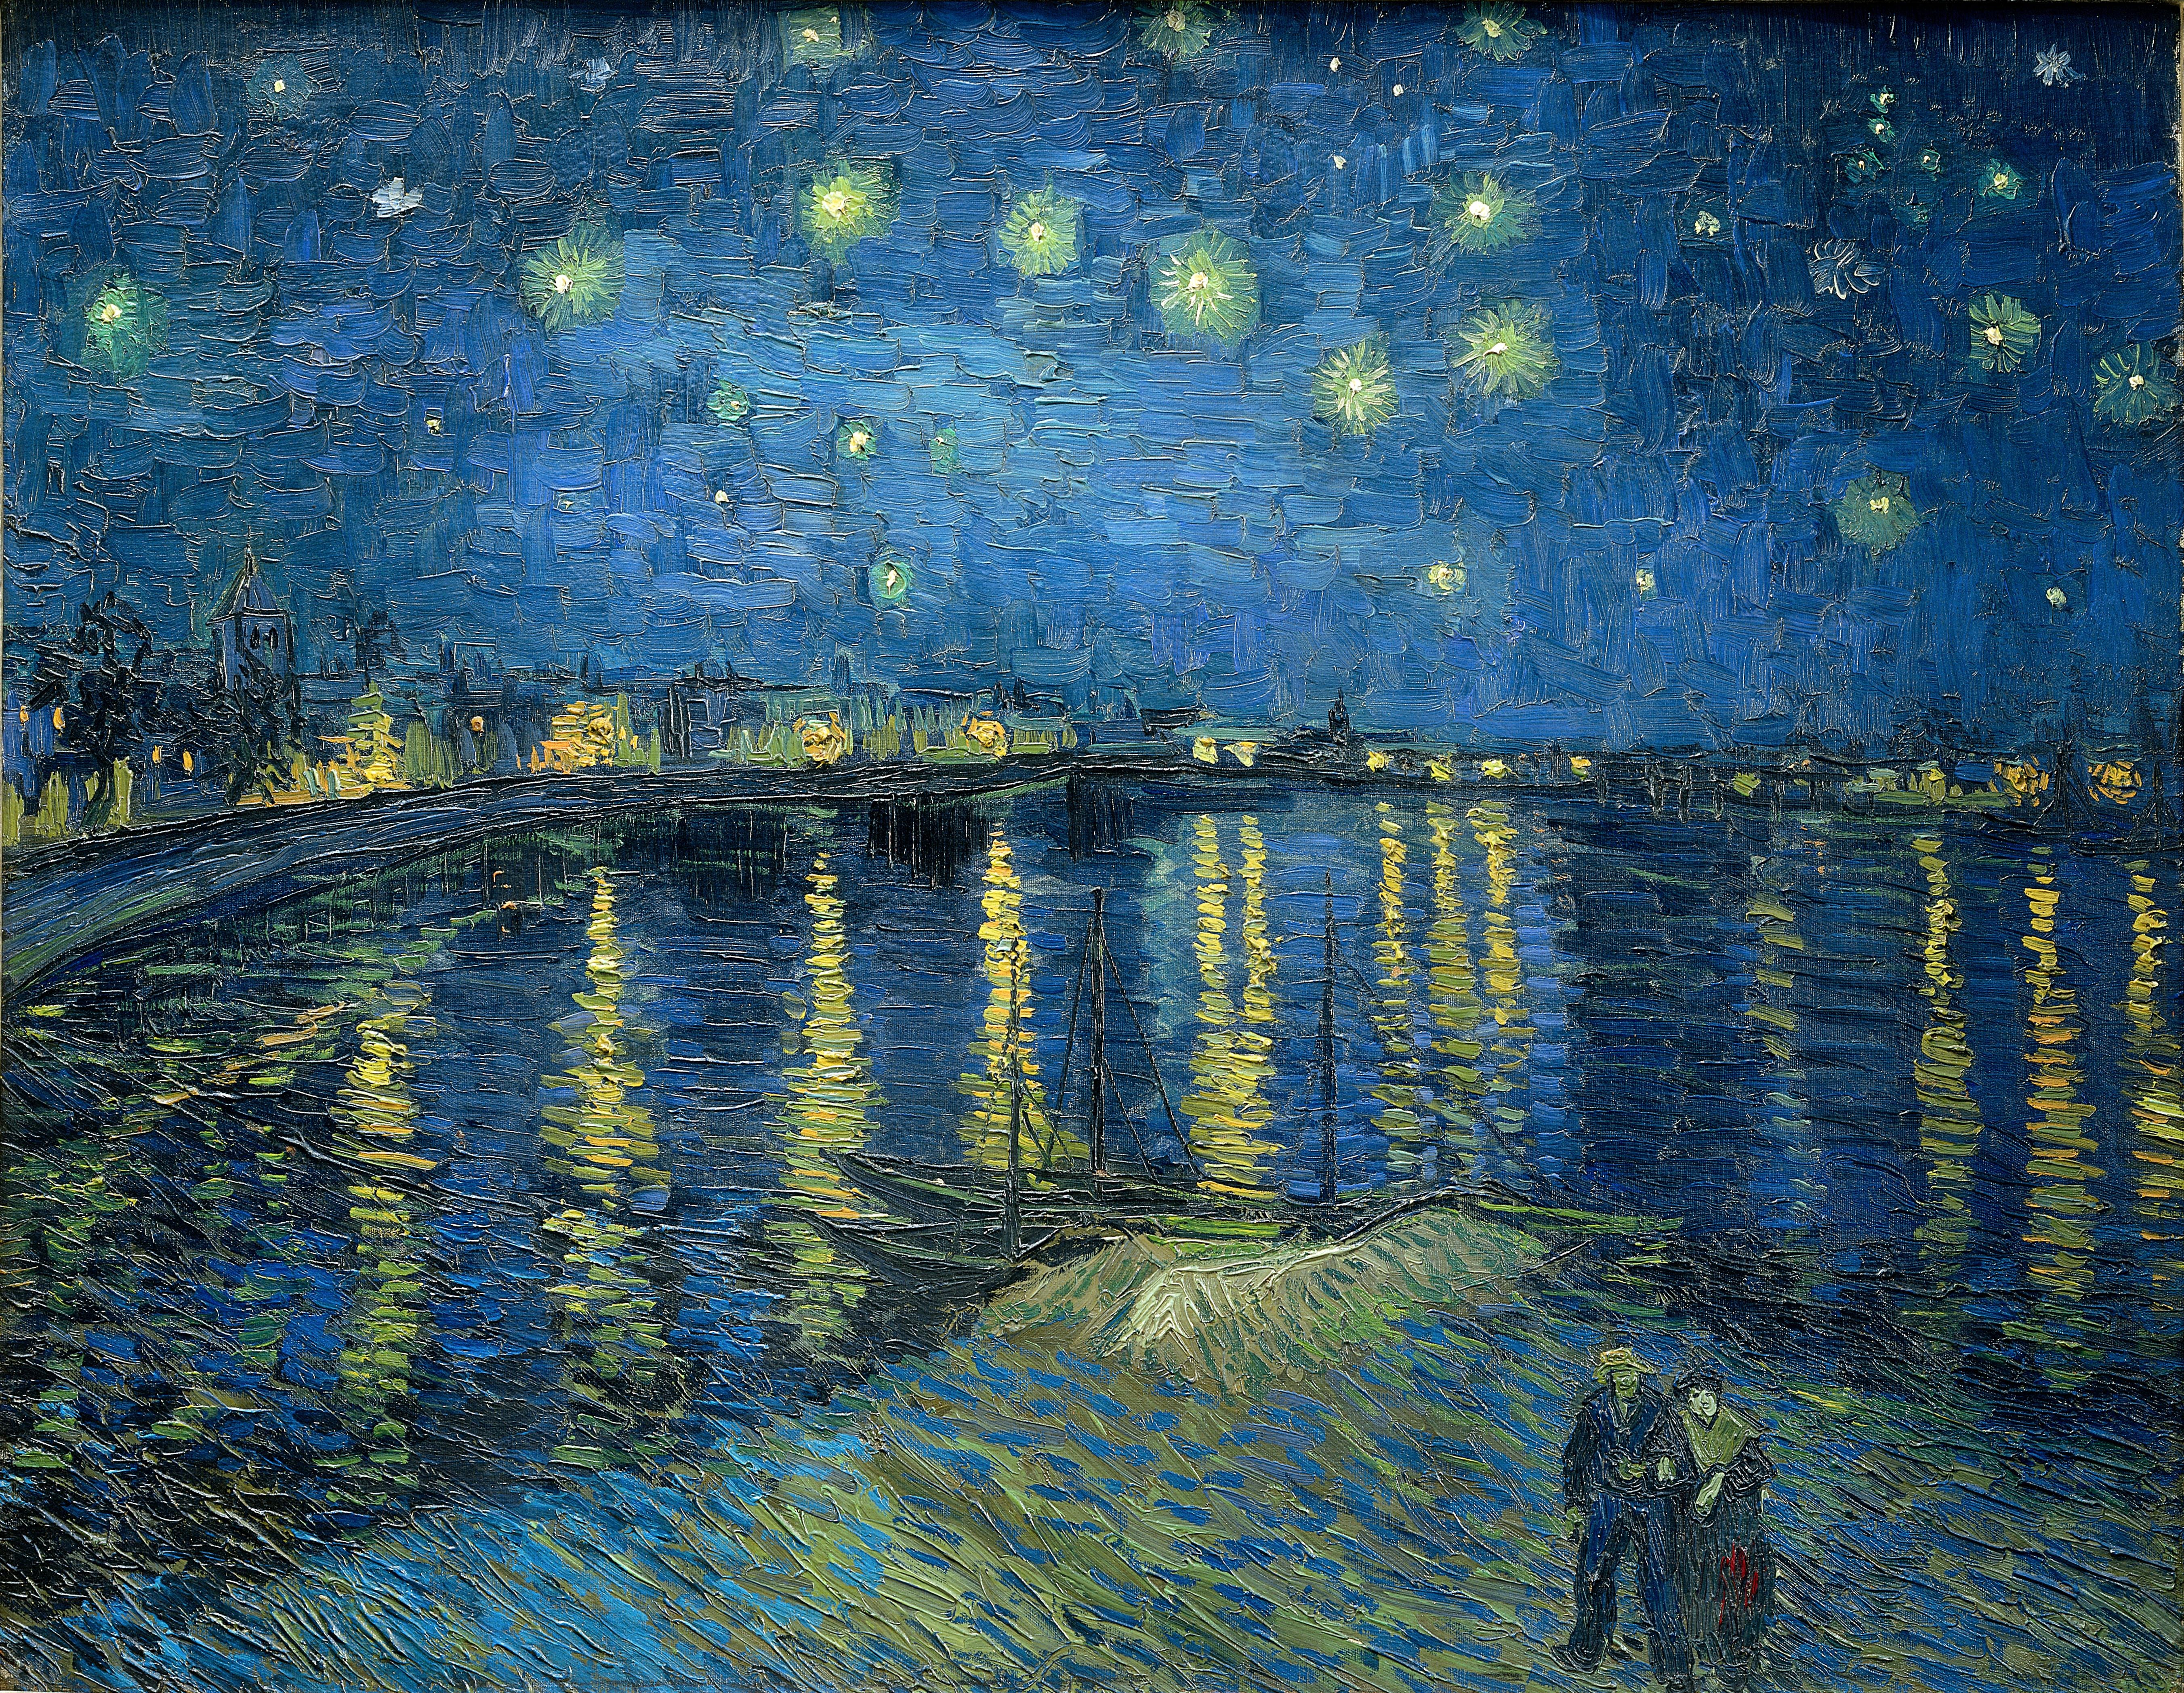 Starry Night. Life Lessons from Van Gogh